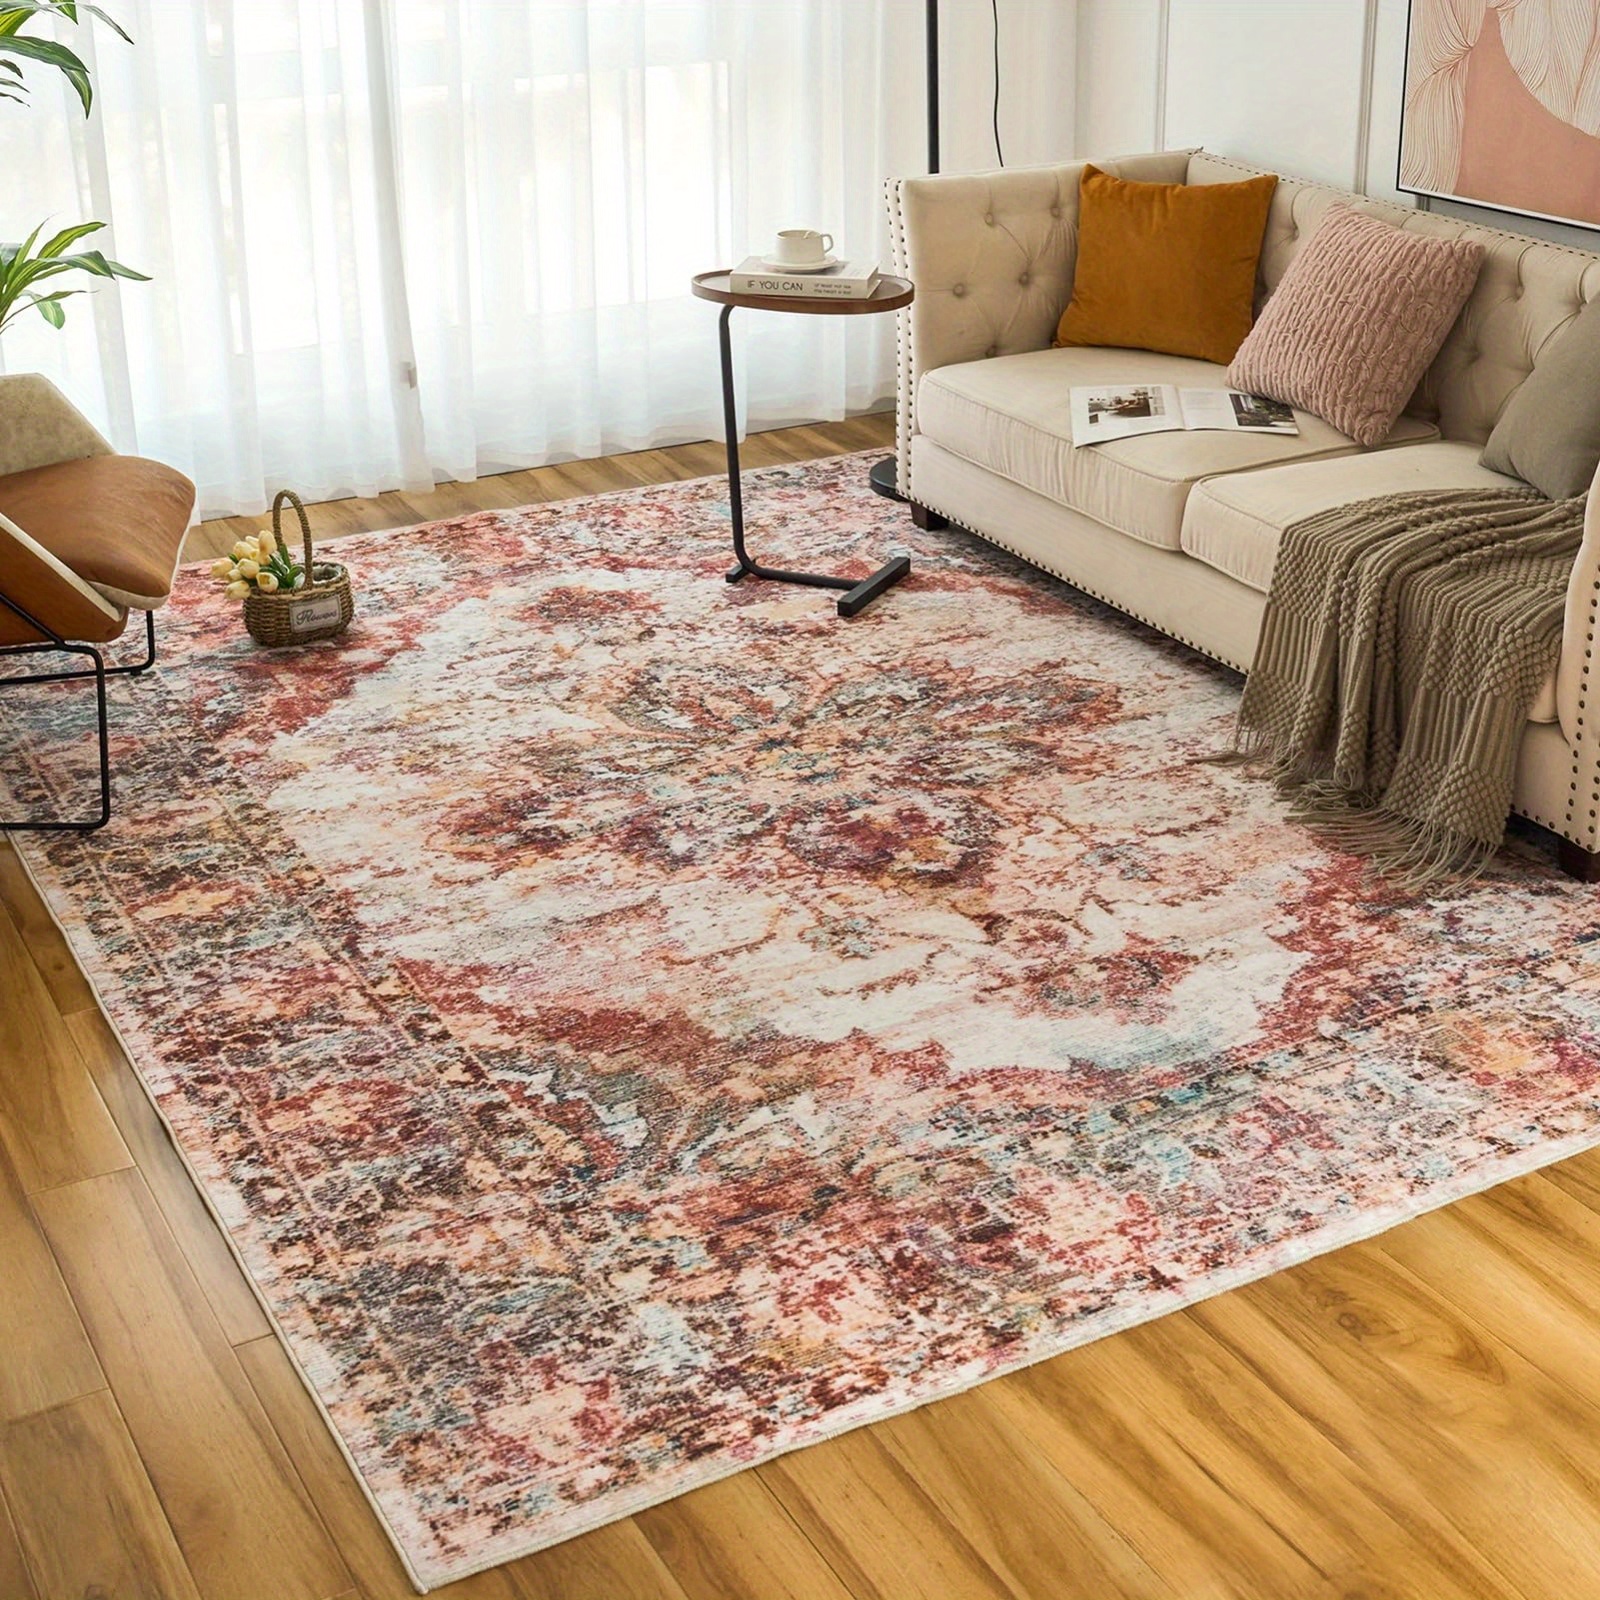 

Washable Rugs Non-slip Vintage Rugs Lightweight Low Pile Machine Washable Rugs Stain Resistant Queen Size Rugs Soft Rugs Thin Rugs For Living Room Bedroom Dining Room Flooring, Vintage-orange